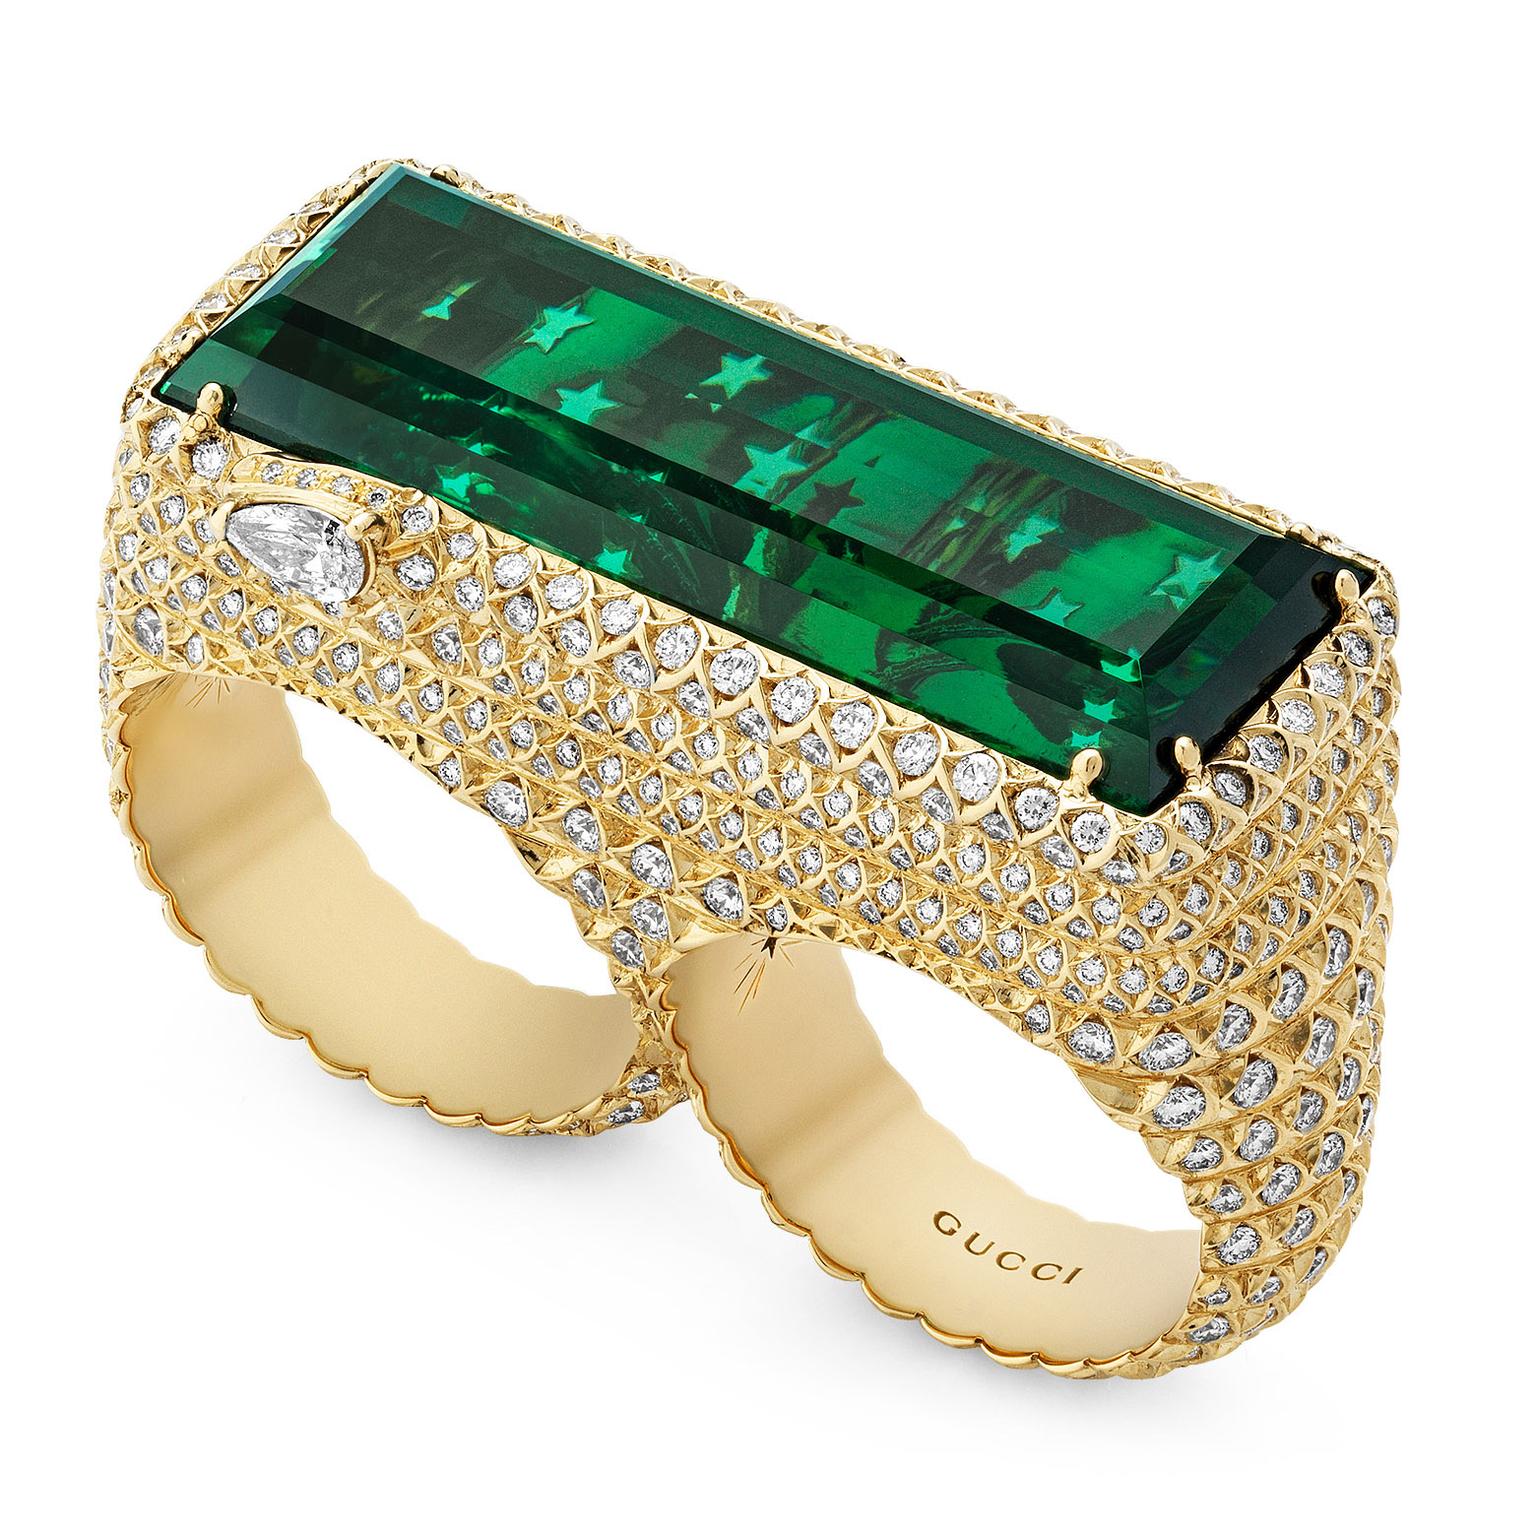 Hortus Deliciarum high jewellery two-finger ring by Gucci 